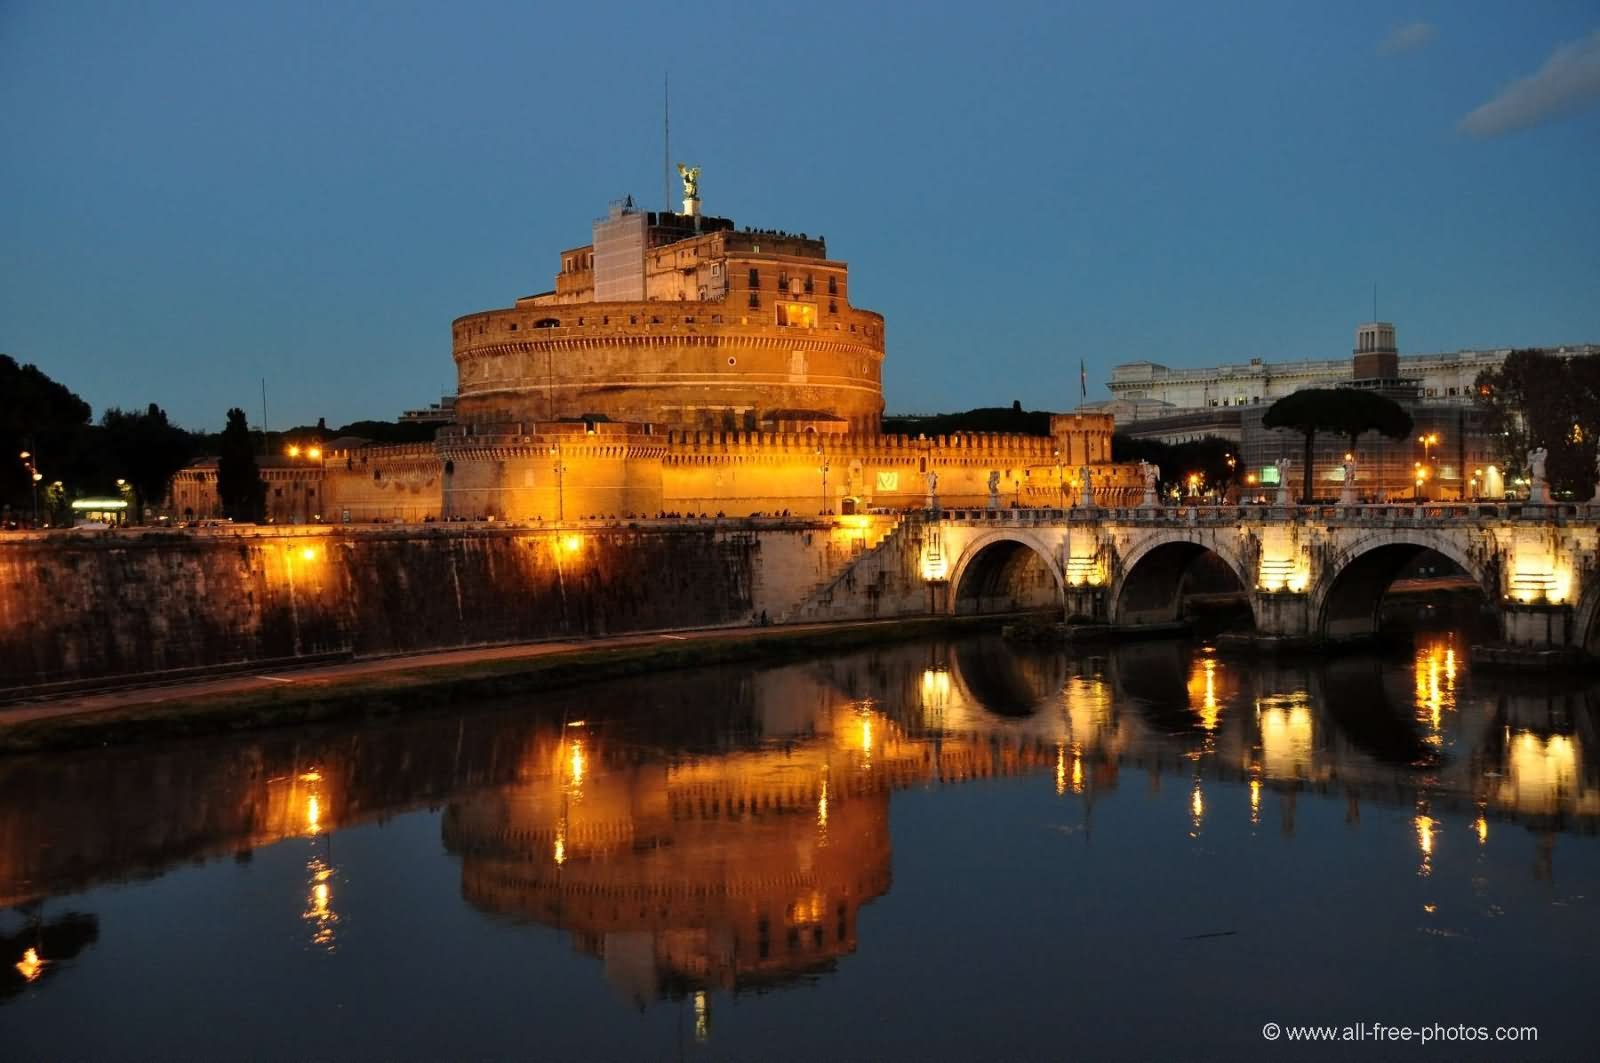 Night View Of Castel Sant'Angelo In Rome